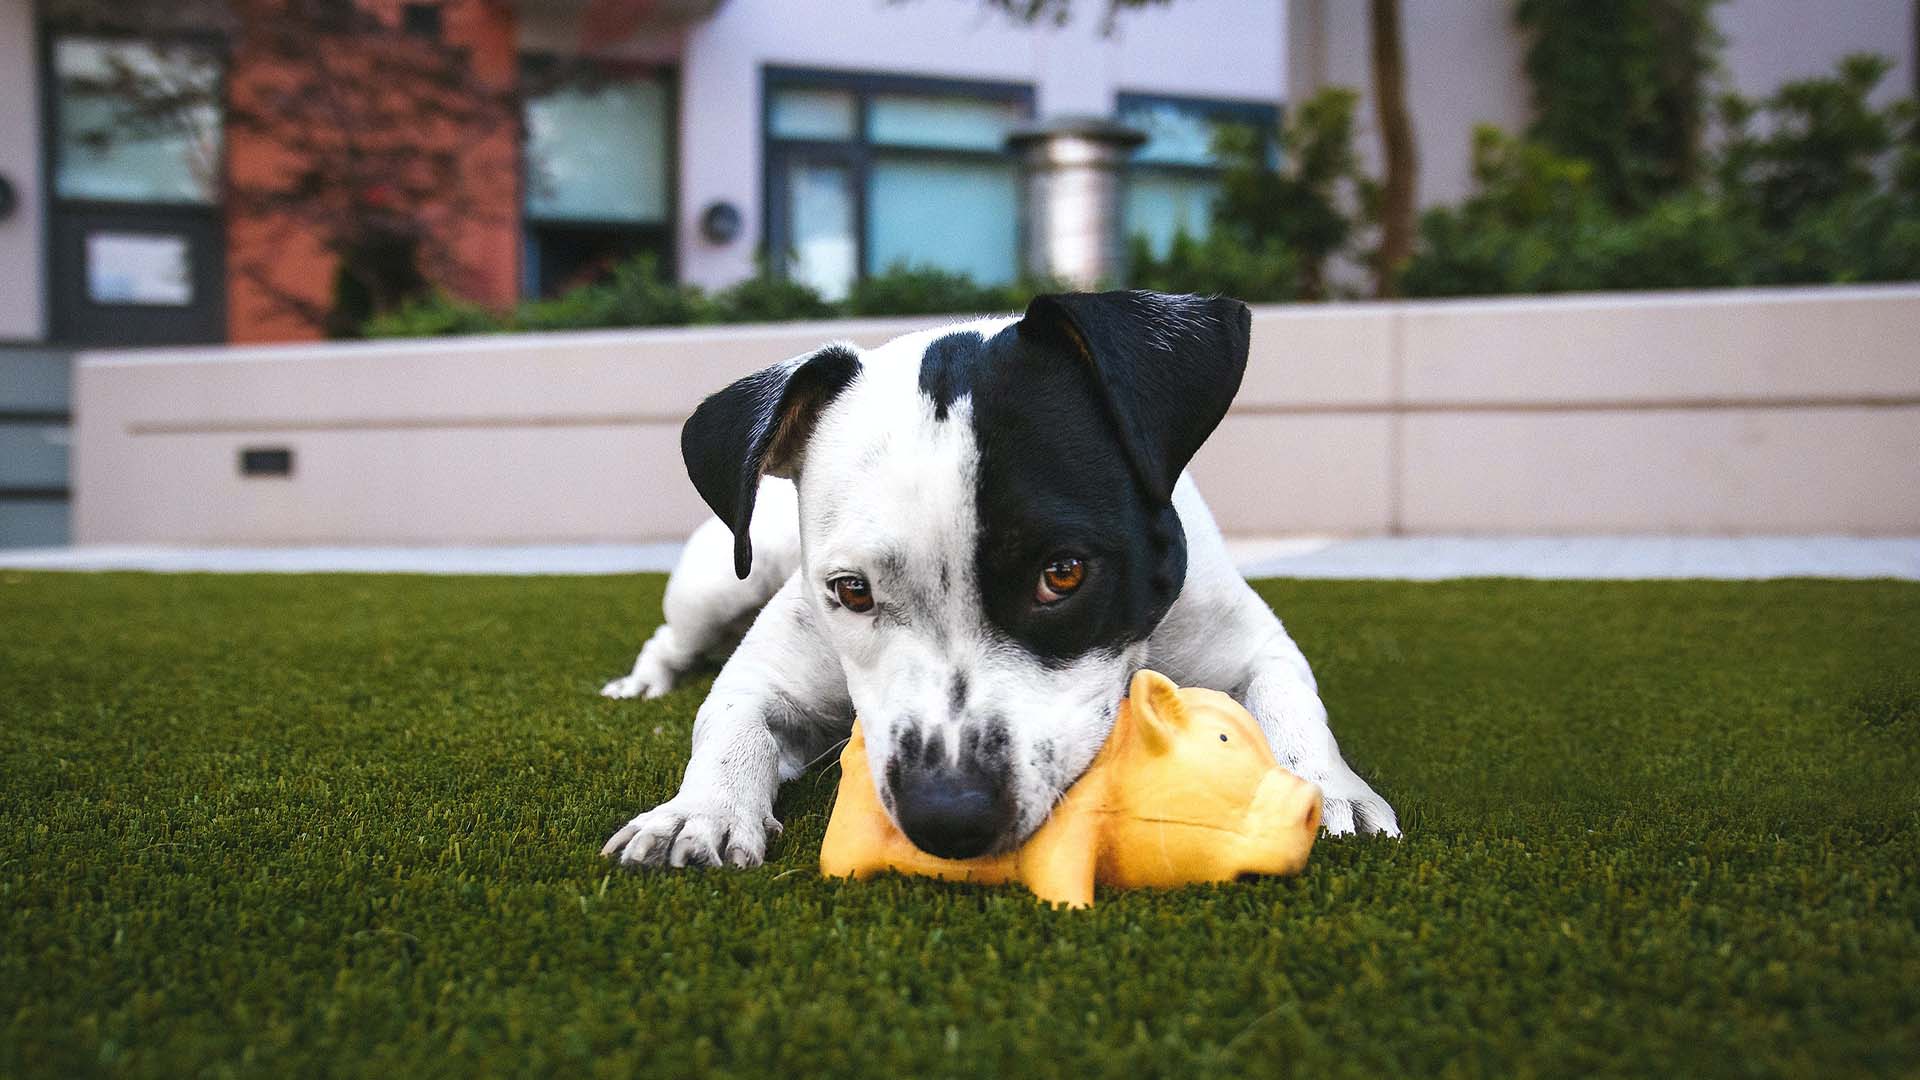 black and white dog playing with toy